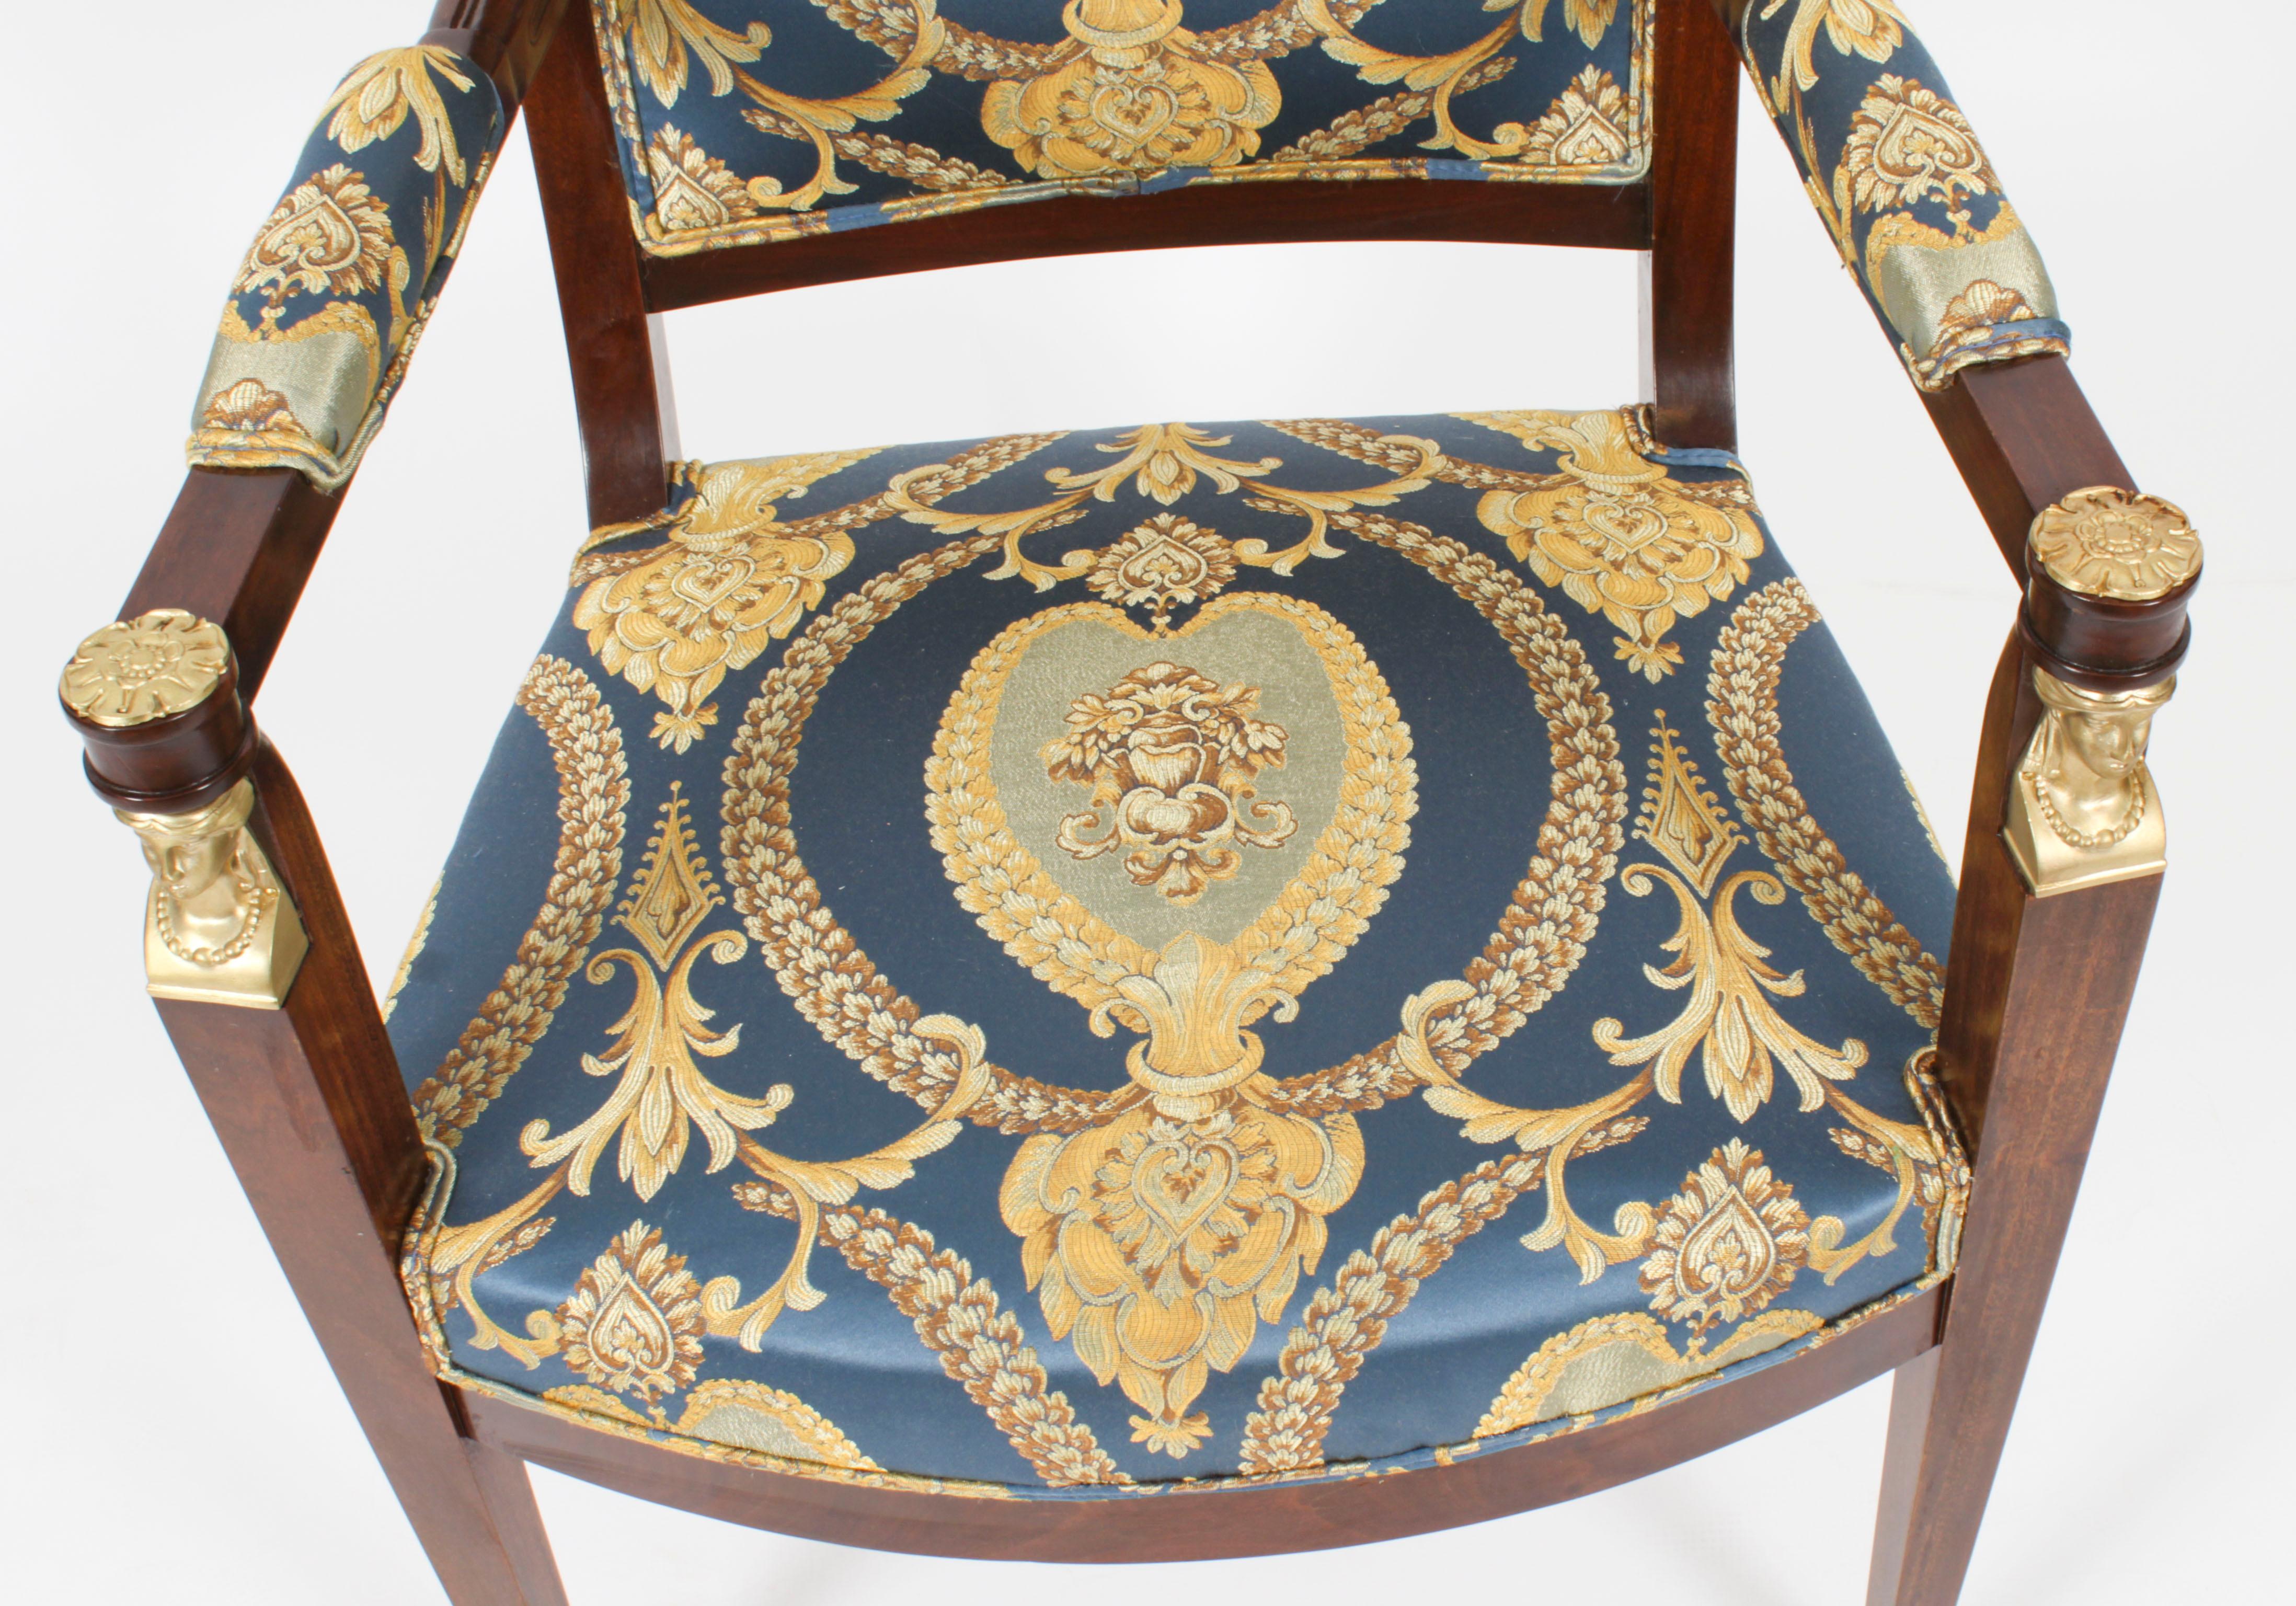 Mahogany Antique Pair French Empire Revival Ormolu Mounted Armchairs 1870s 19th Century For Sale